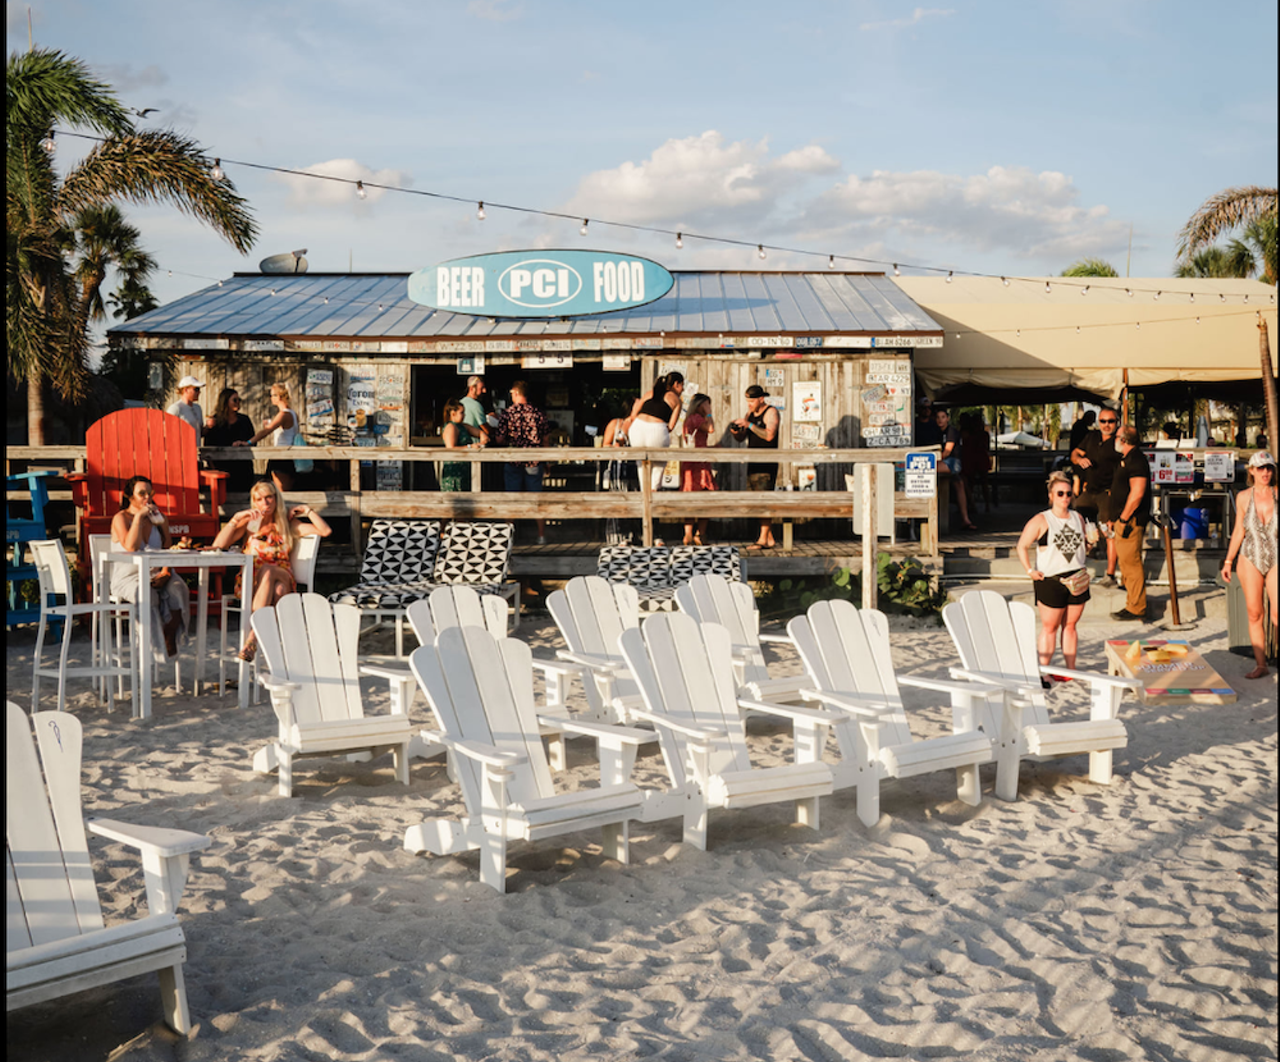 Snack On The Beach, Our Favorite Happy Hour Spot